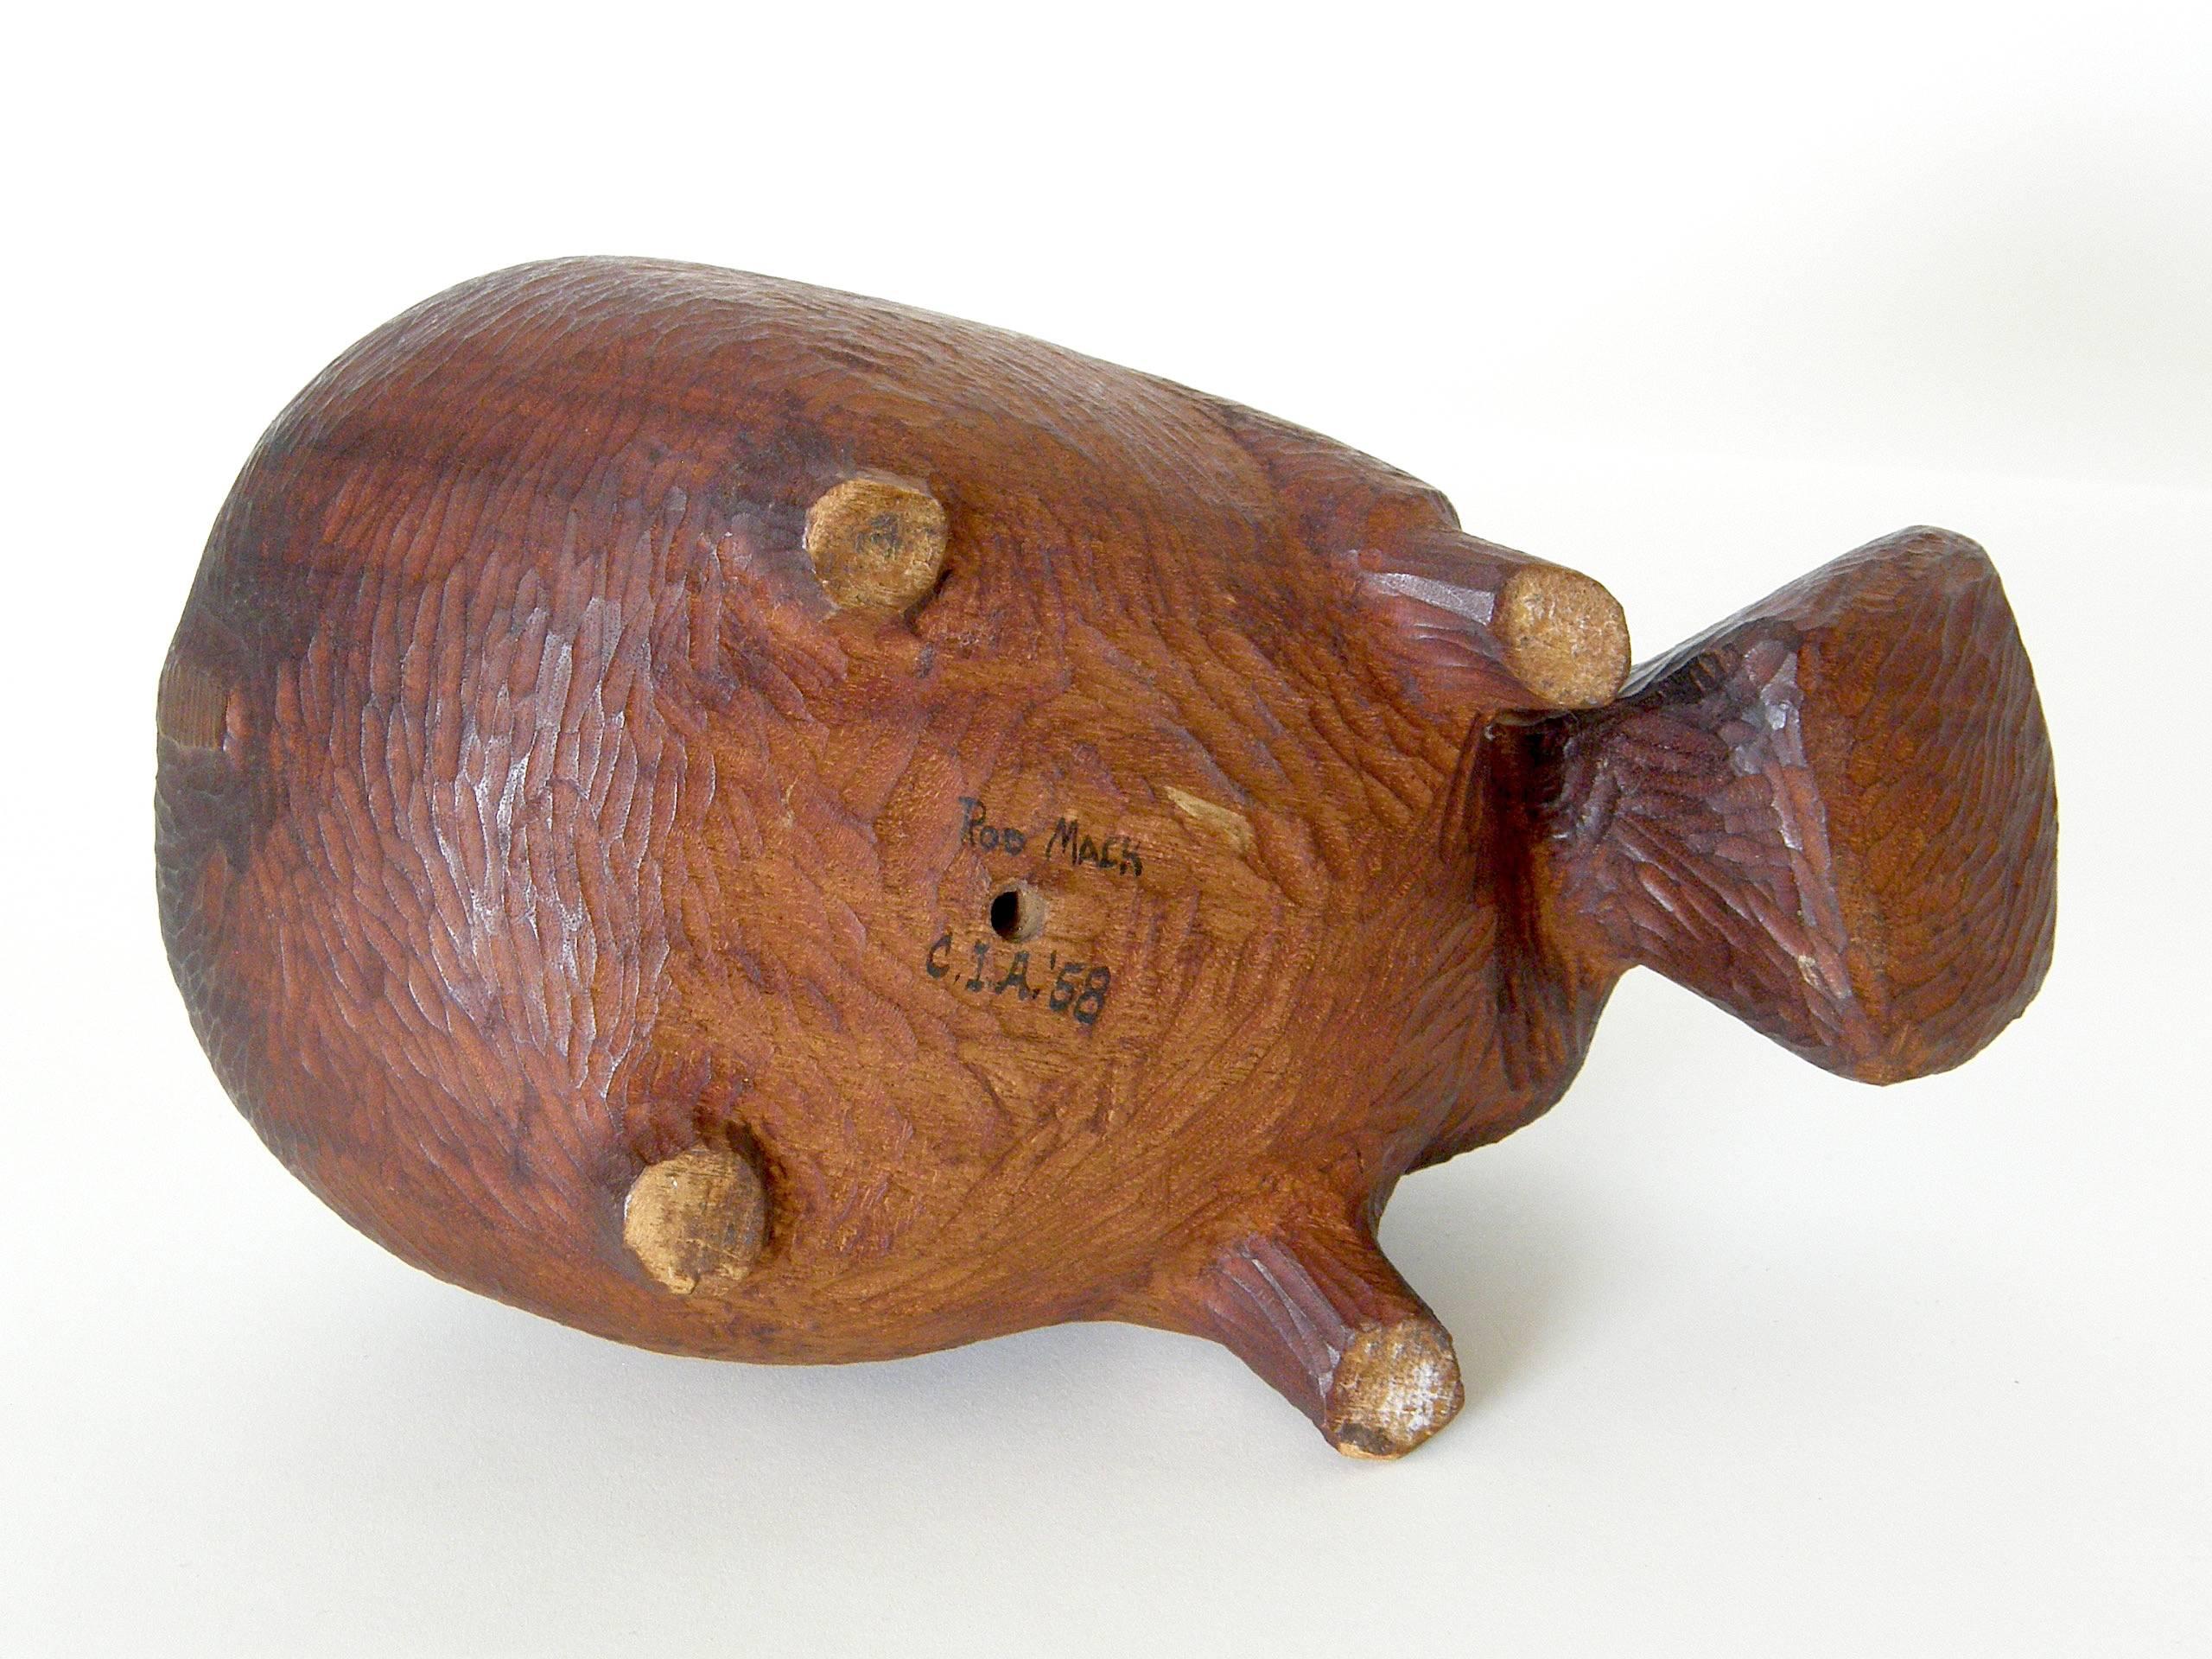 Mid-Century Modern Whimsical Hand Carved Wooden Hippo Figure by Rod Mack Dated 1958